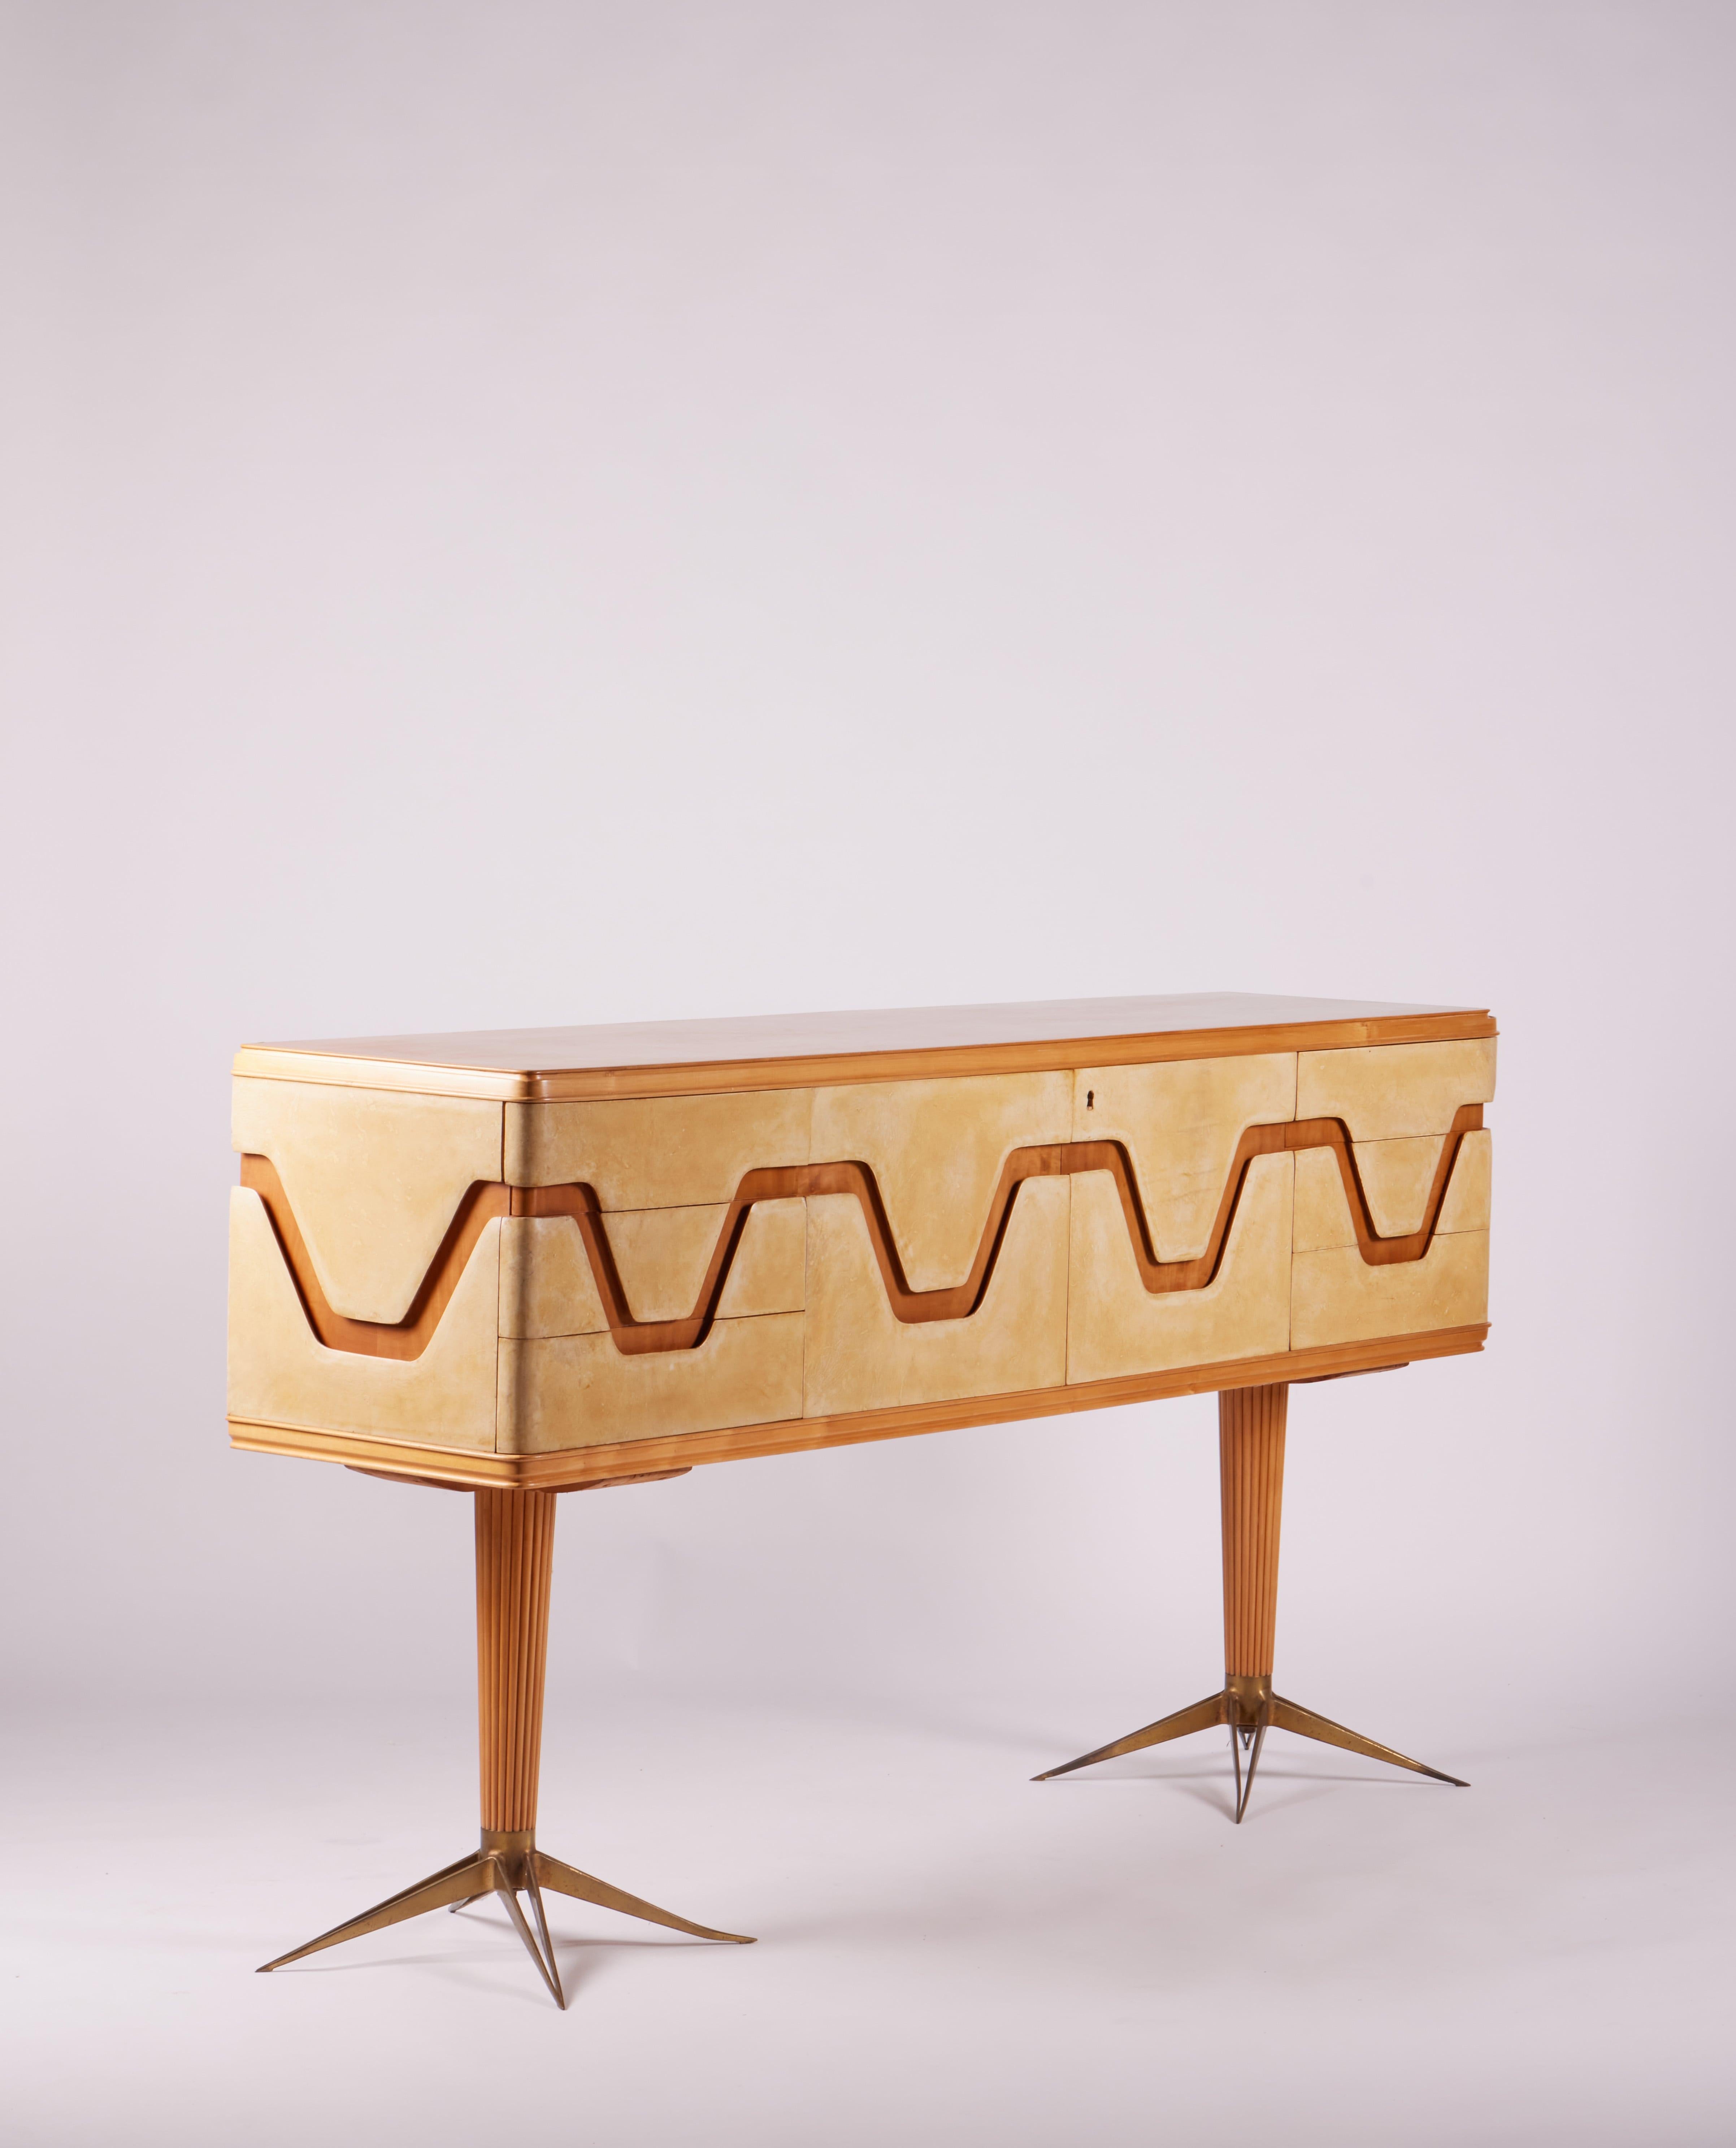 Italian Midcentury Parchment and Walnut Sideboard with Brass Legs, 1940s For Sale 3